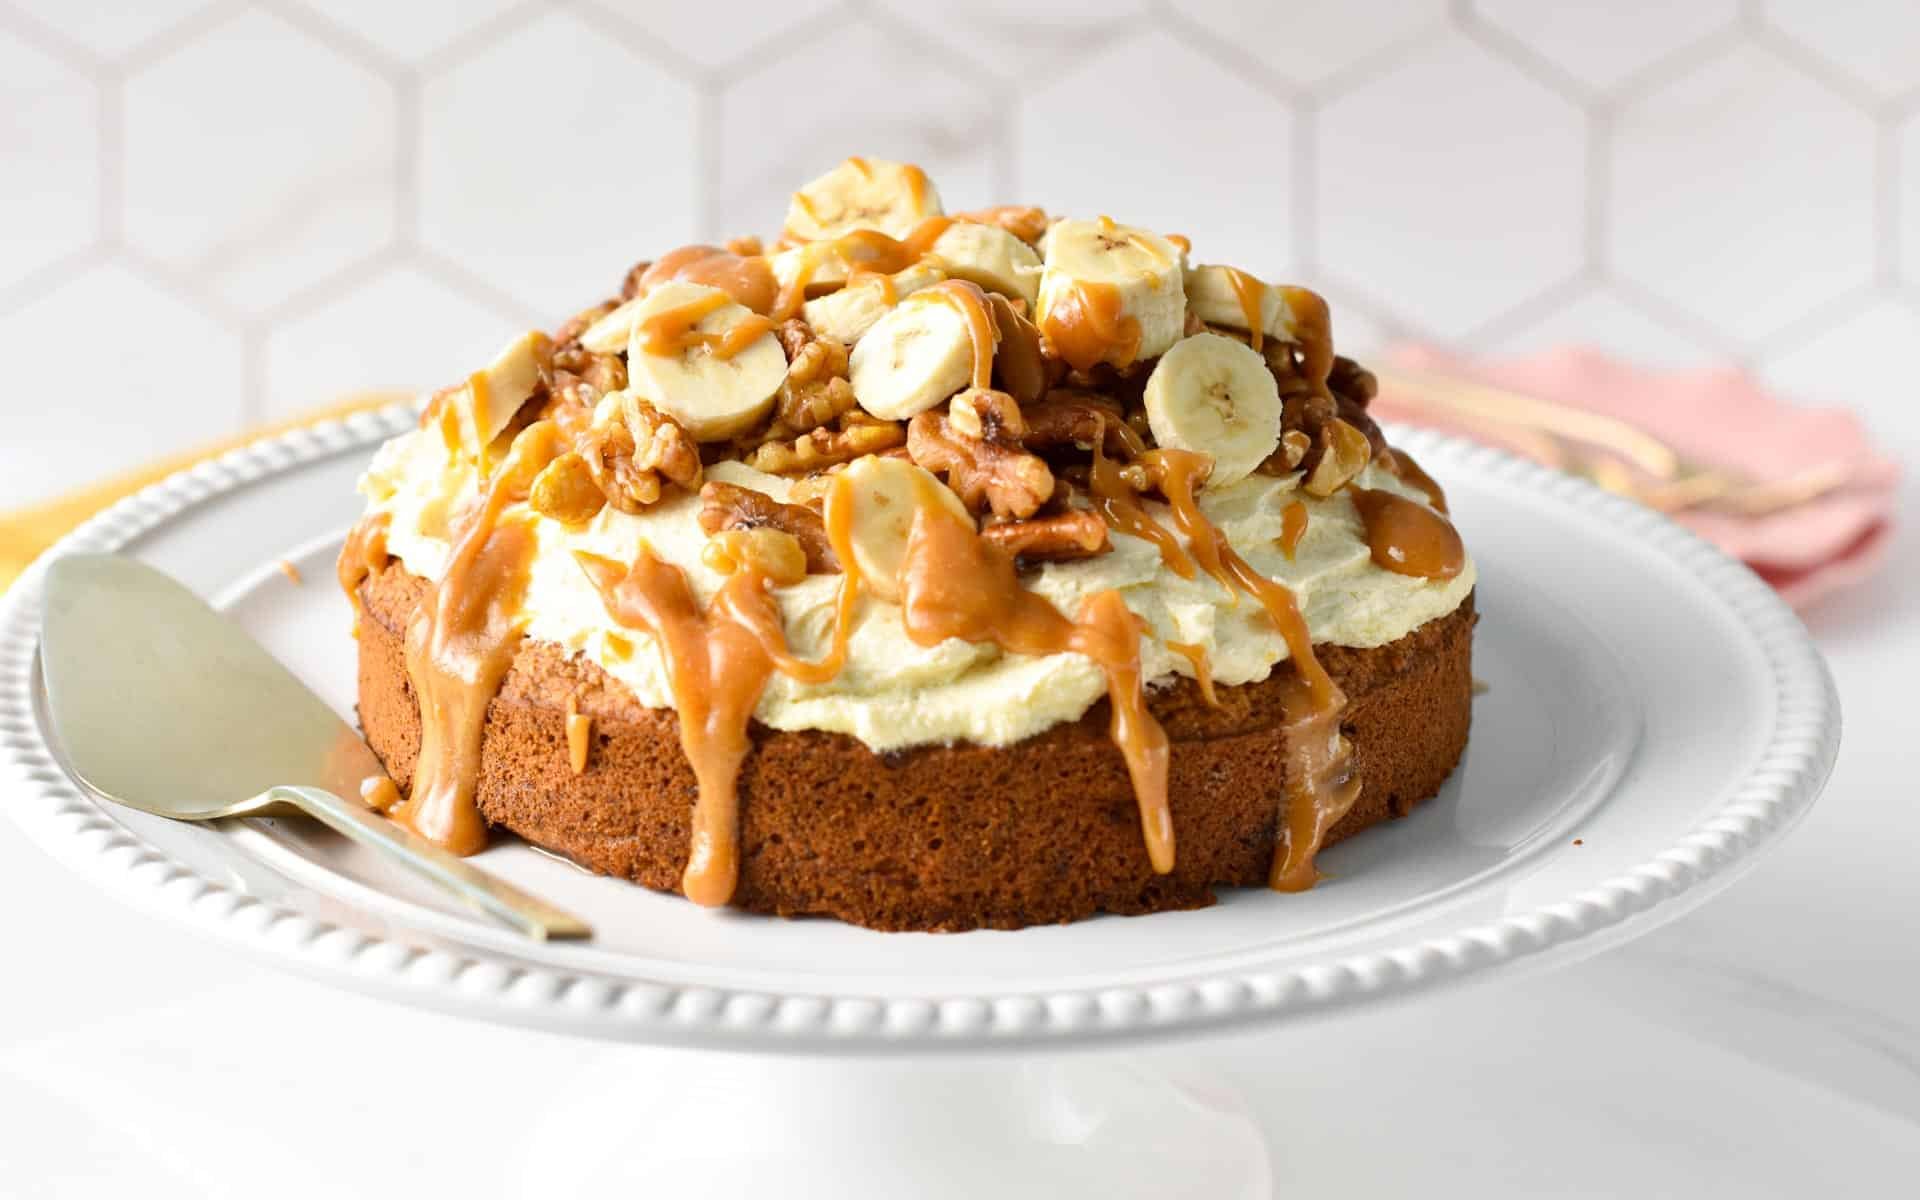 A single layer oat flour cake topped with dairy-free vanilla frosting, banana slices, walnuts, pecans, and peanut butter caramel on a cake stand with a serving spatula next to it.